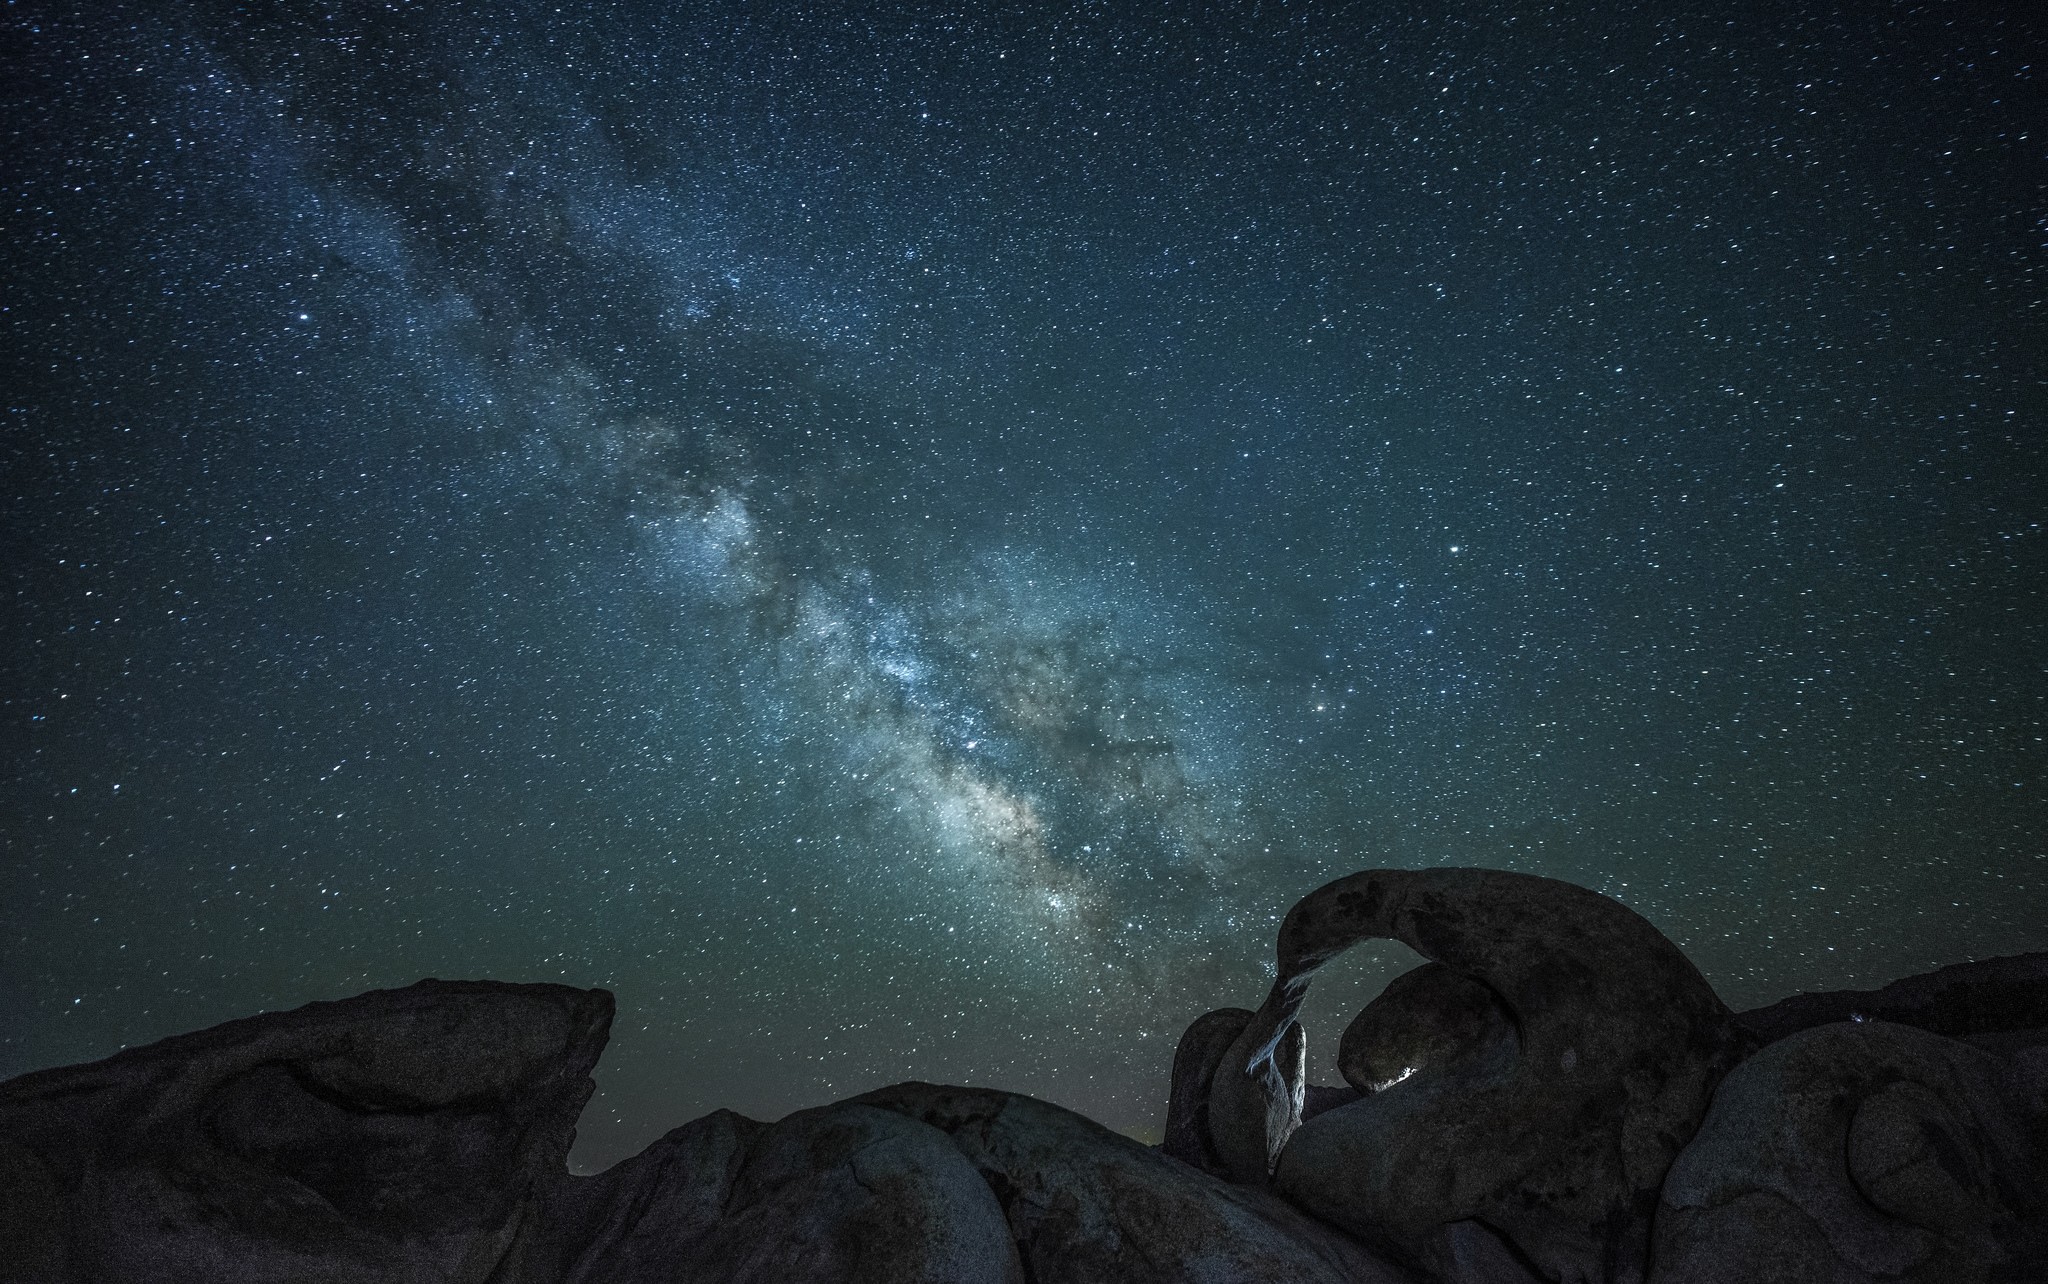 General 2048x1284 landscape stars Milky Way skyscape rock formation looking up sky nature space